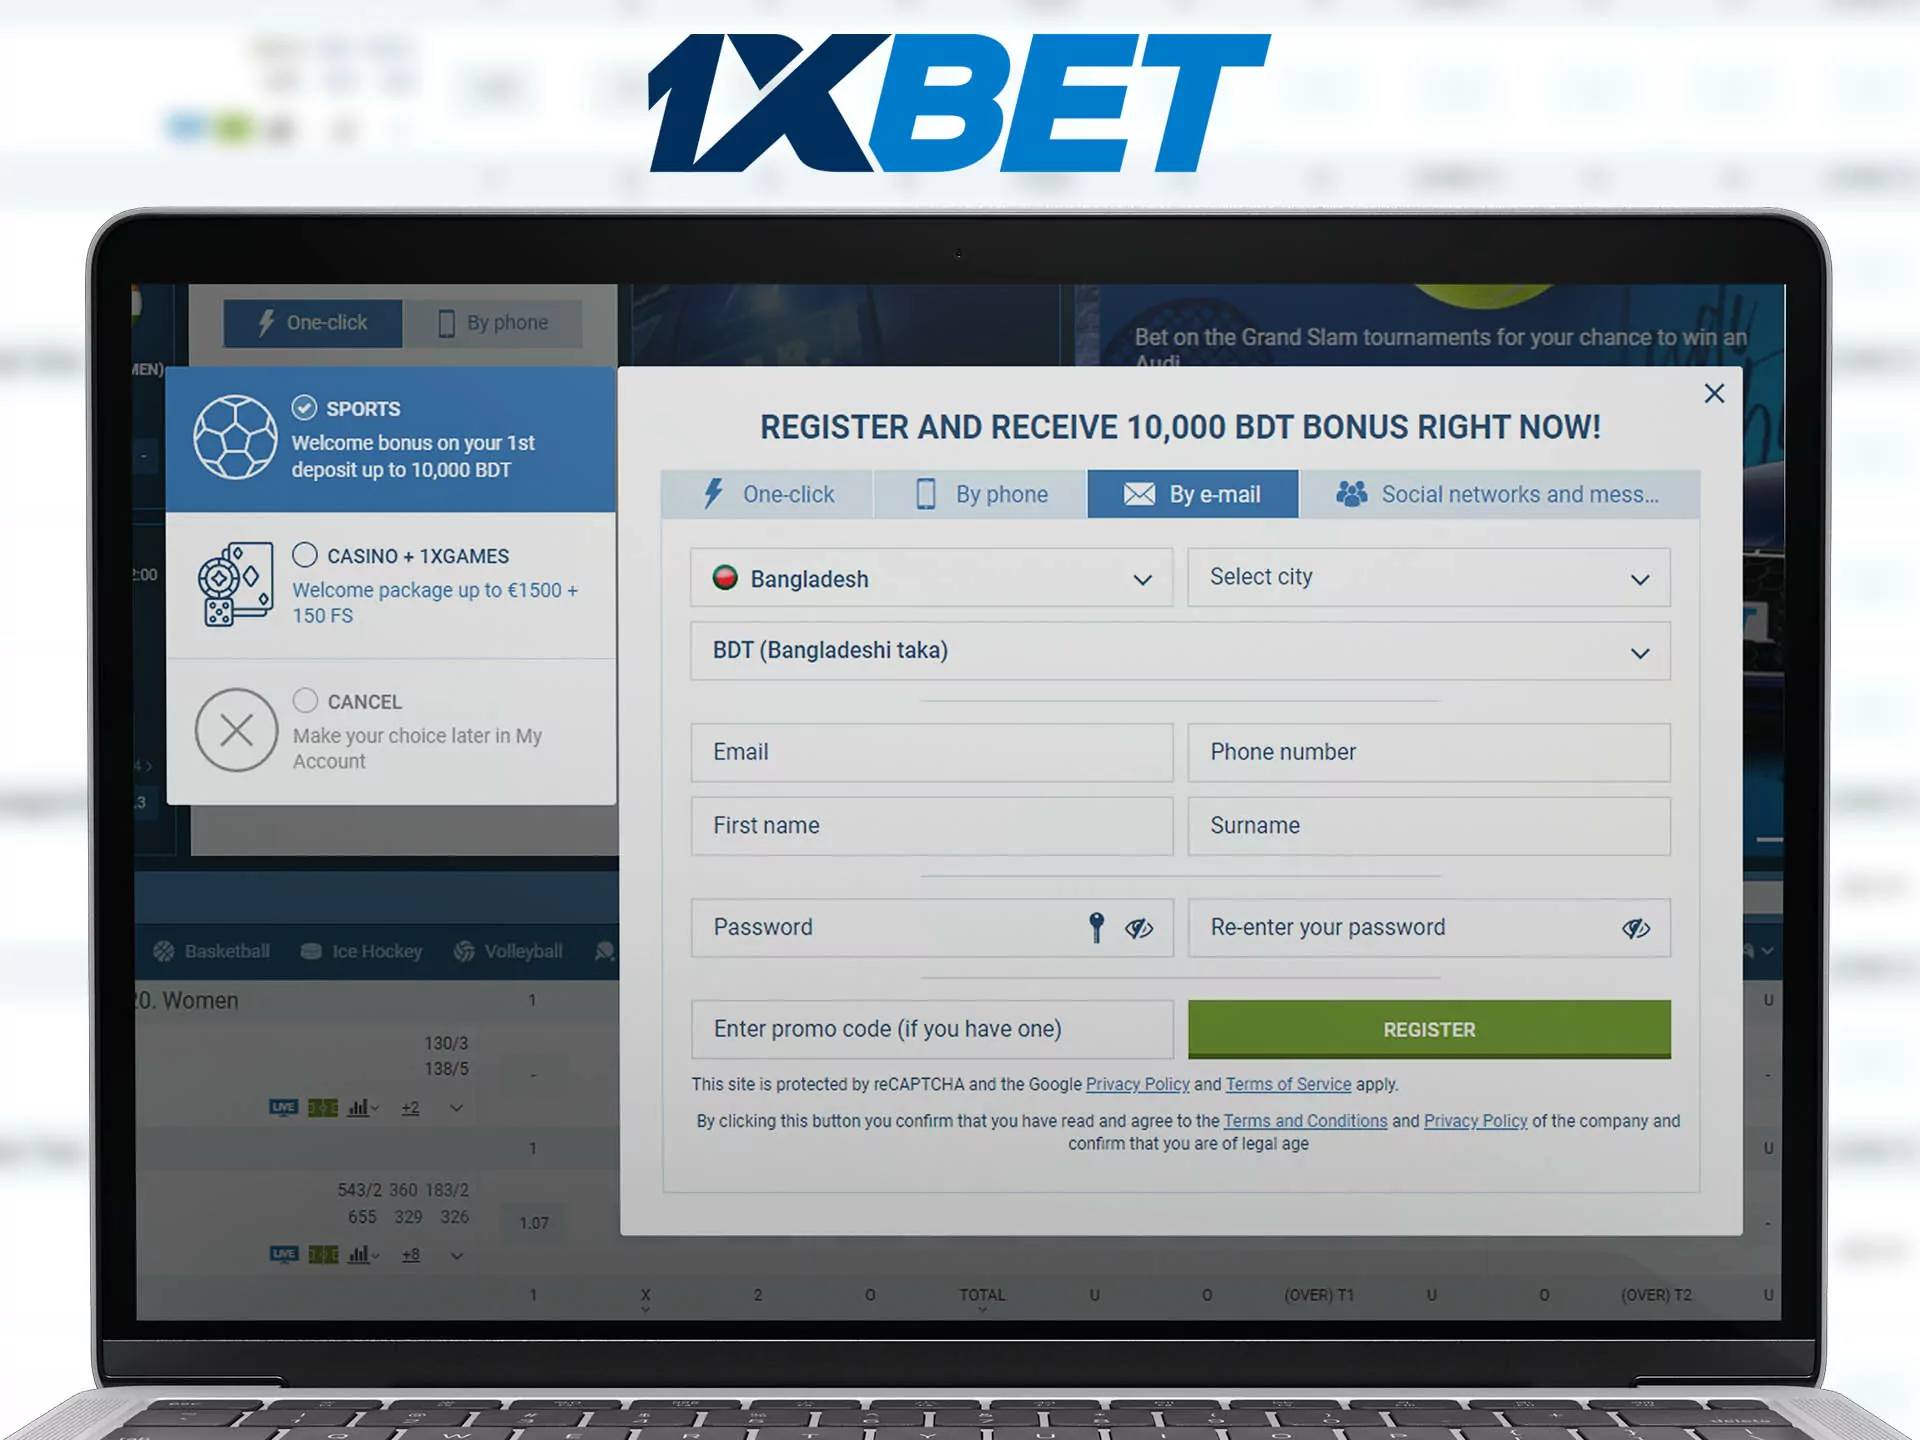 For start playing at 1xbet casino you need complete the registration.